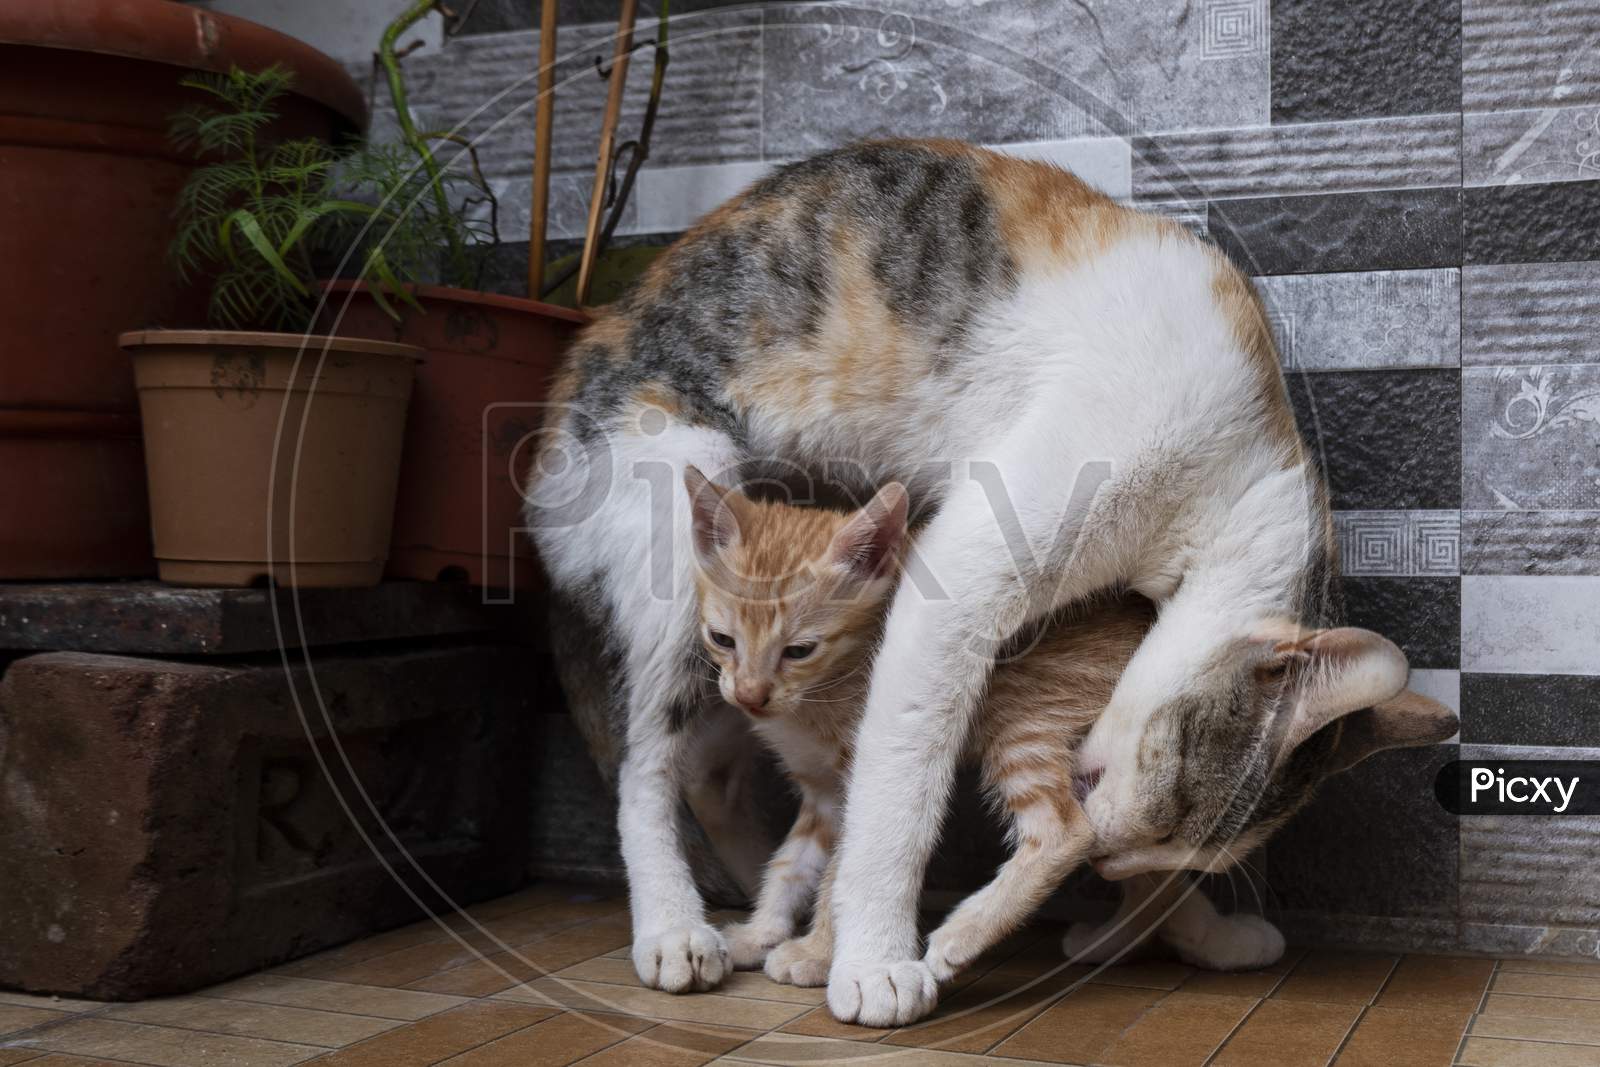 Mother Cat Cleaning Her Kitten